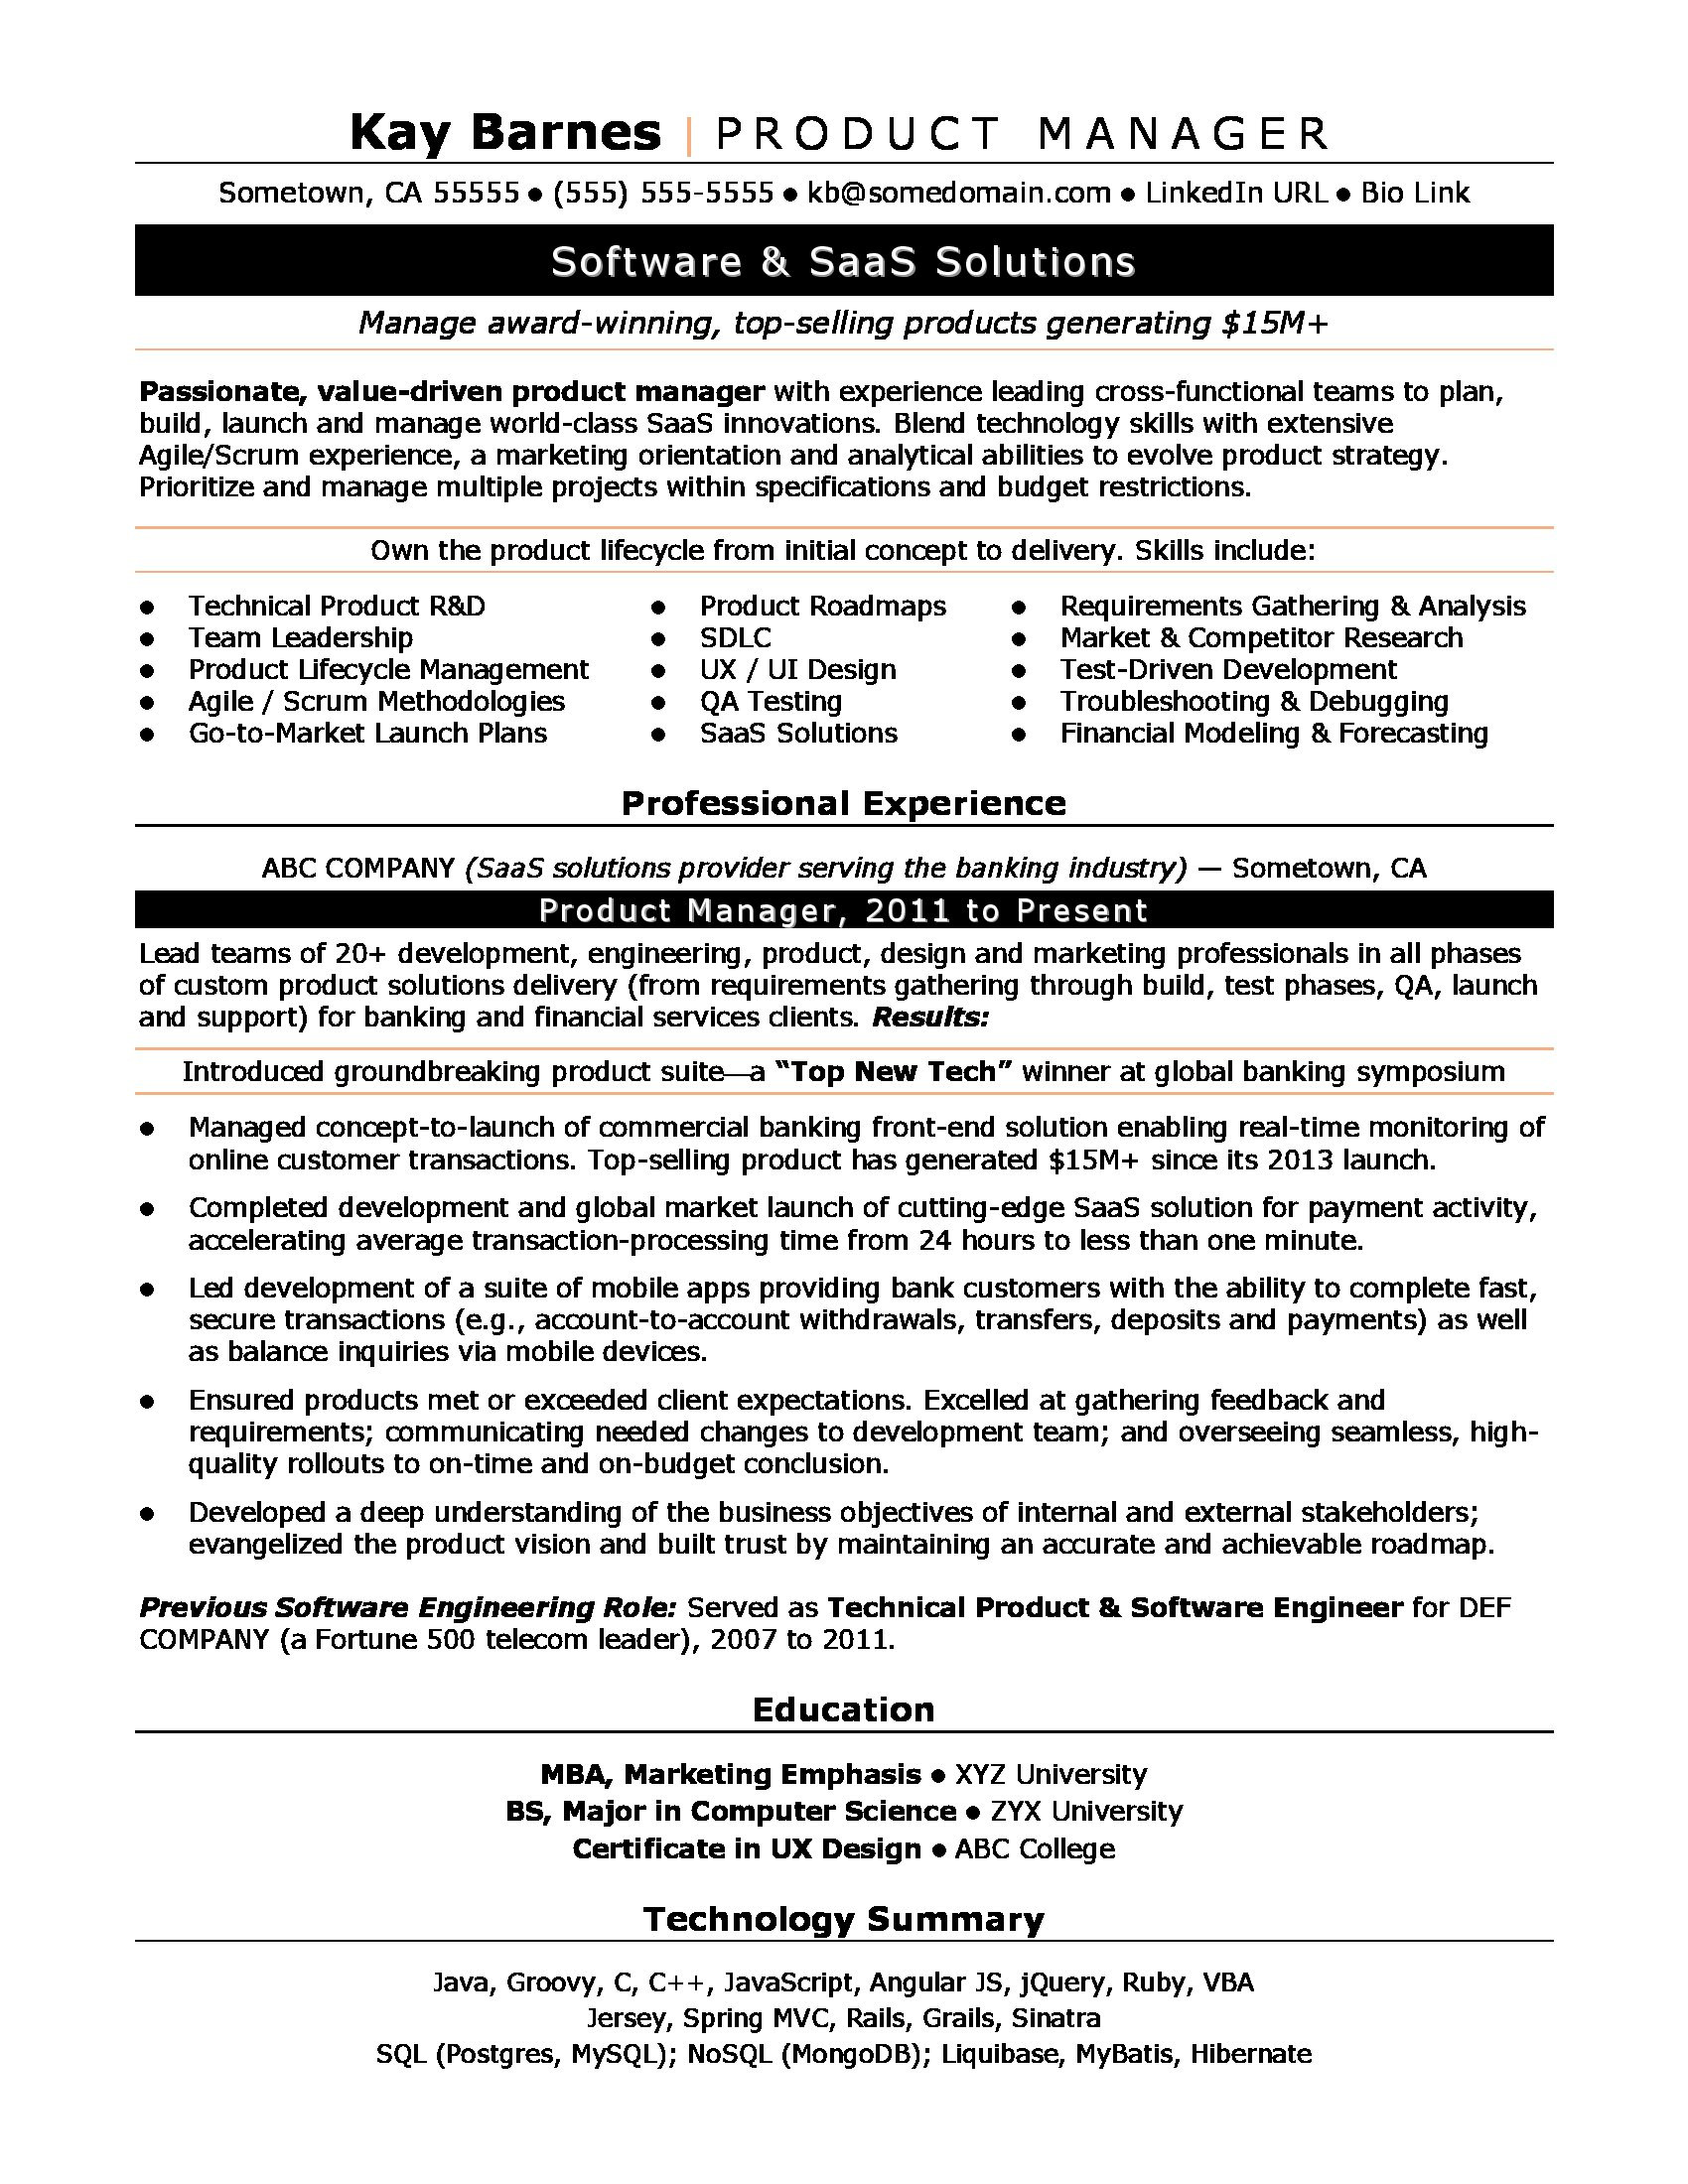 Sample Resume for Production Support Manager Product Manager Resume Sample Monster.com